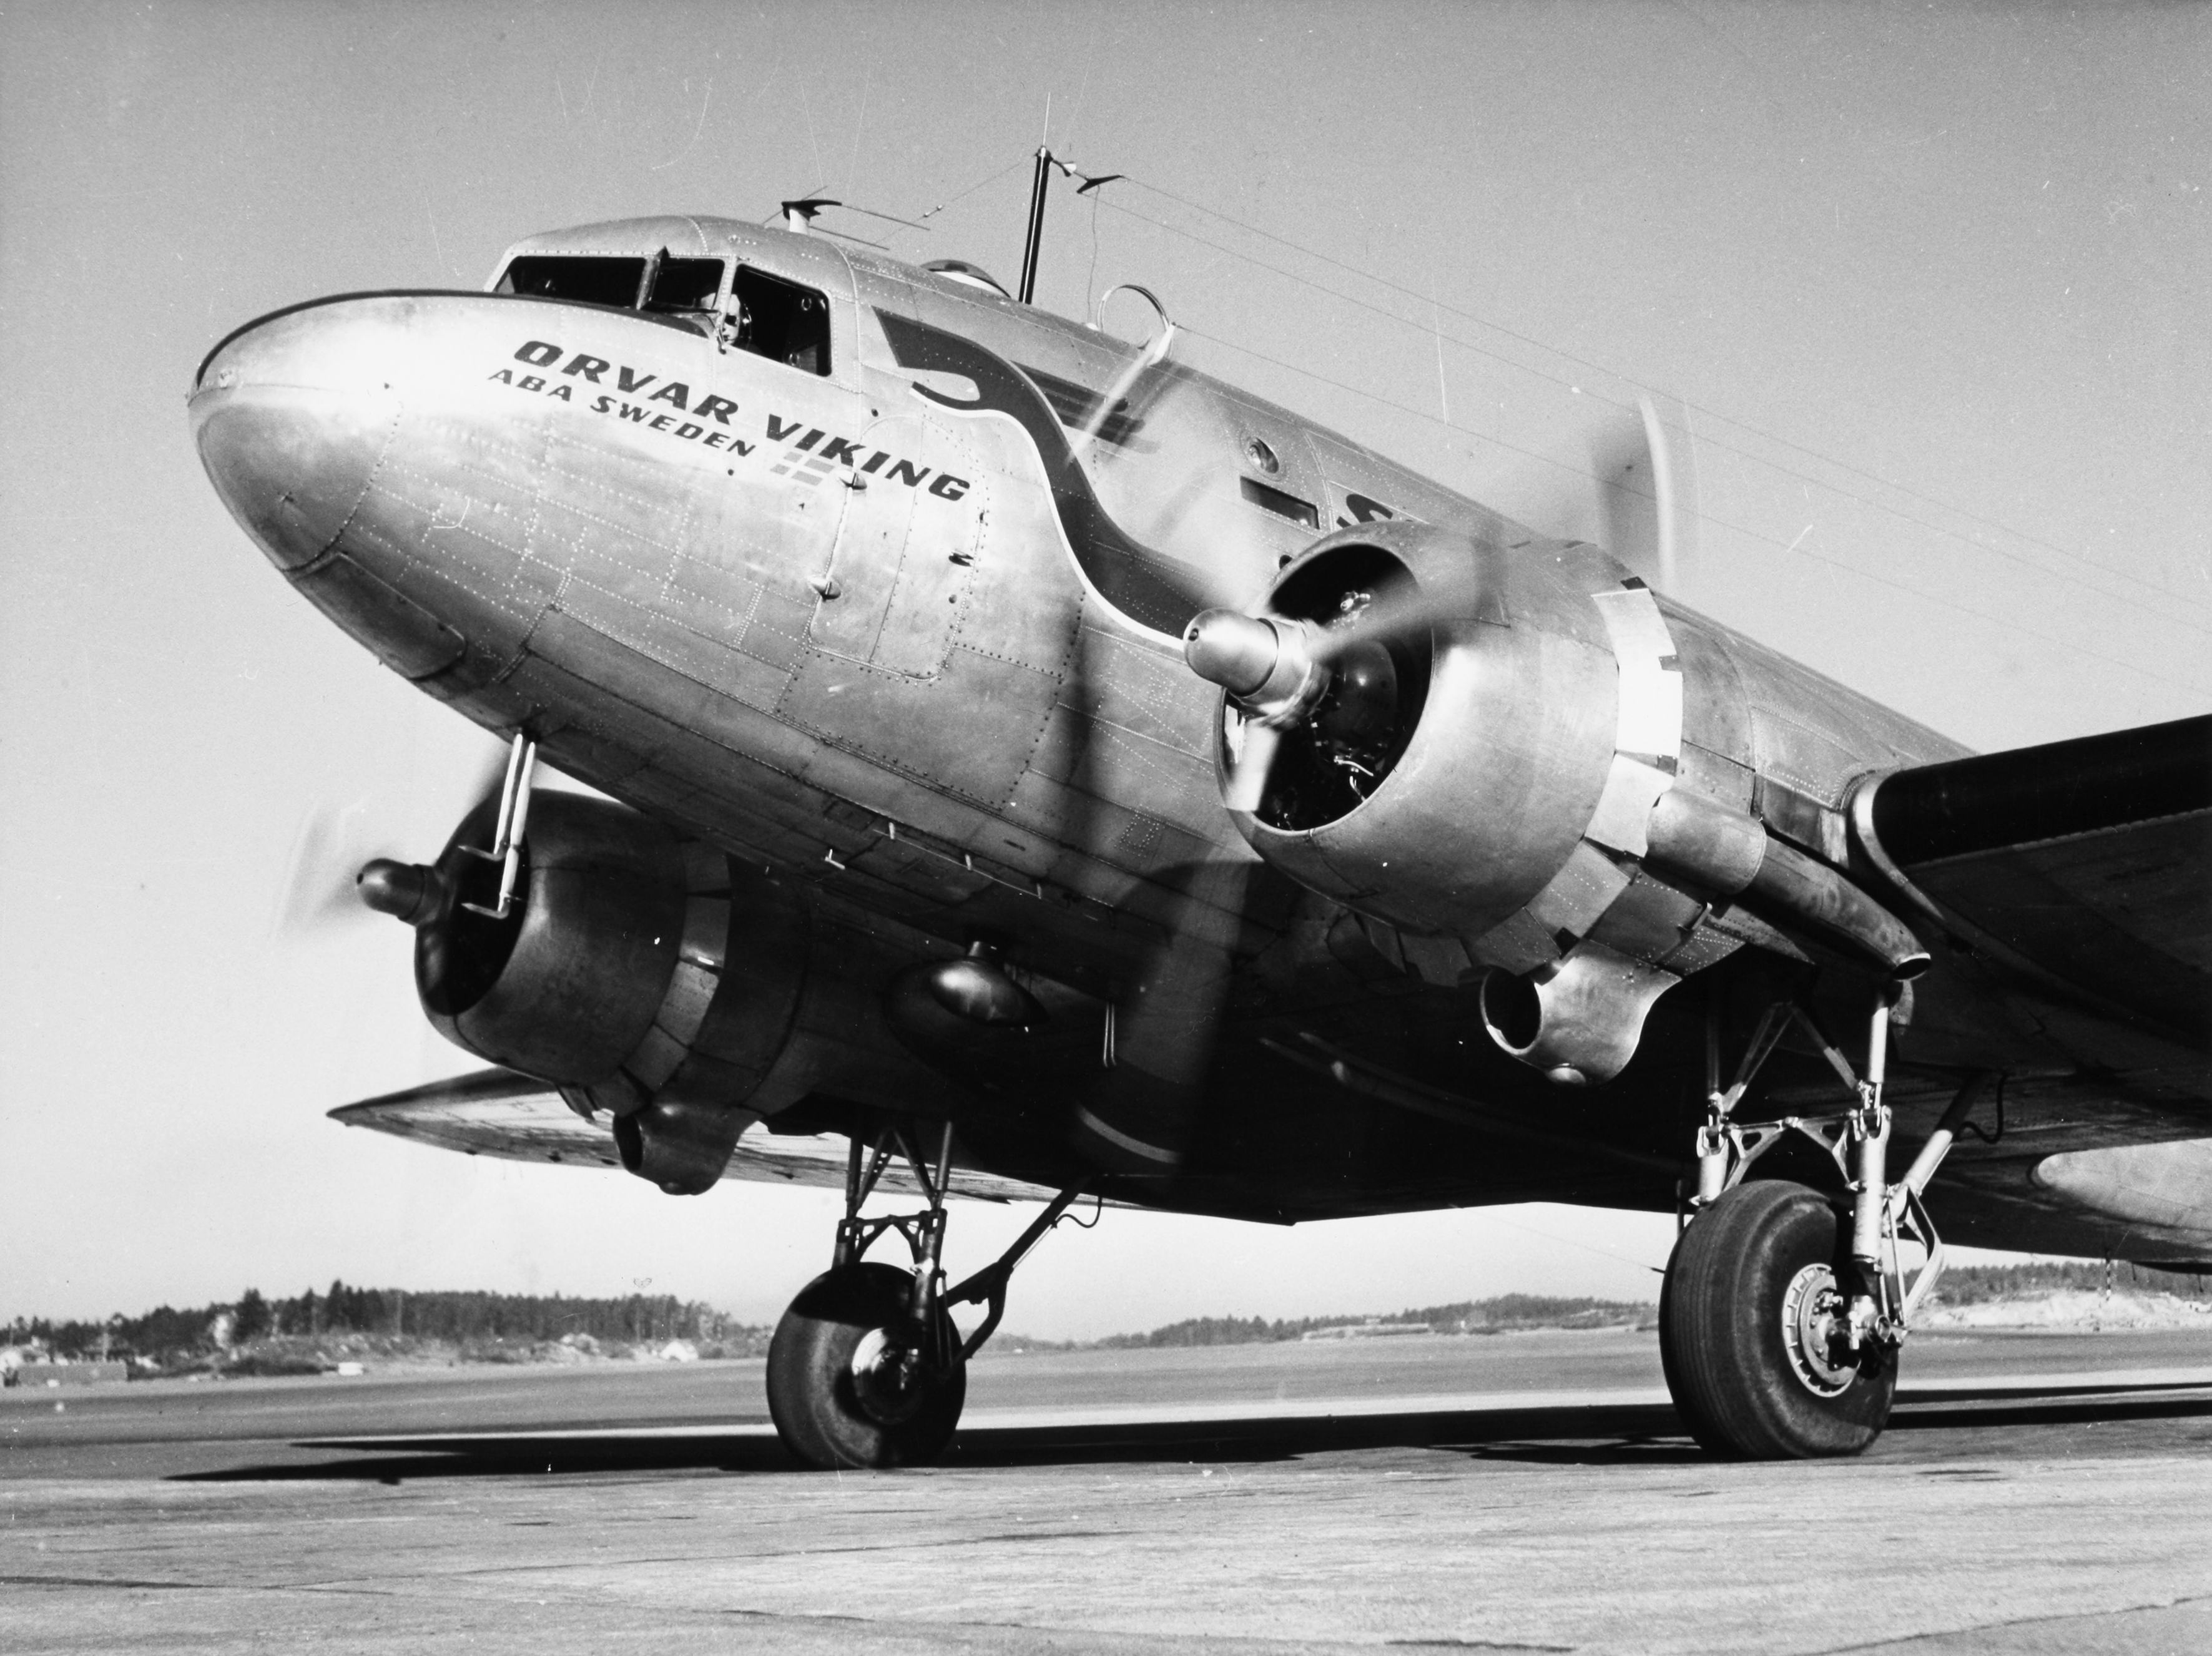 SAS DC 3 Orvar Viking SE BBO, on the ground, at the airport 1940s